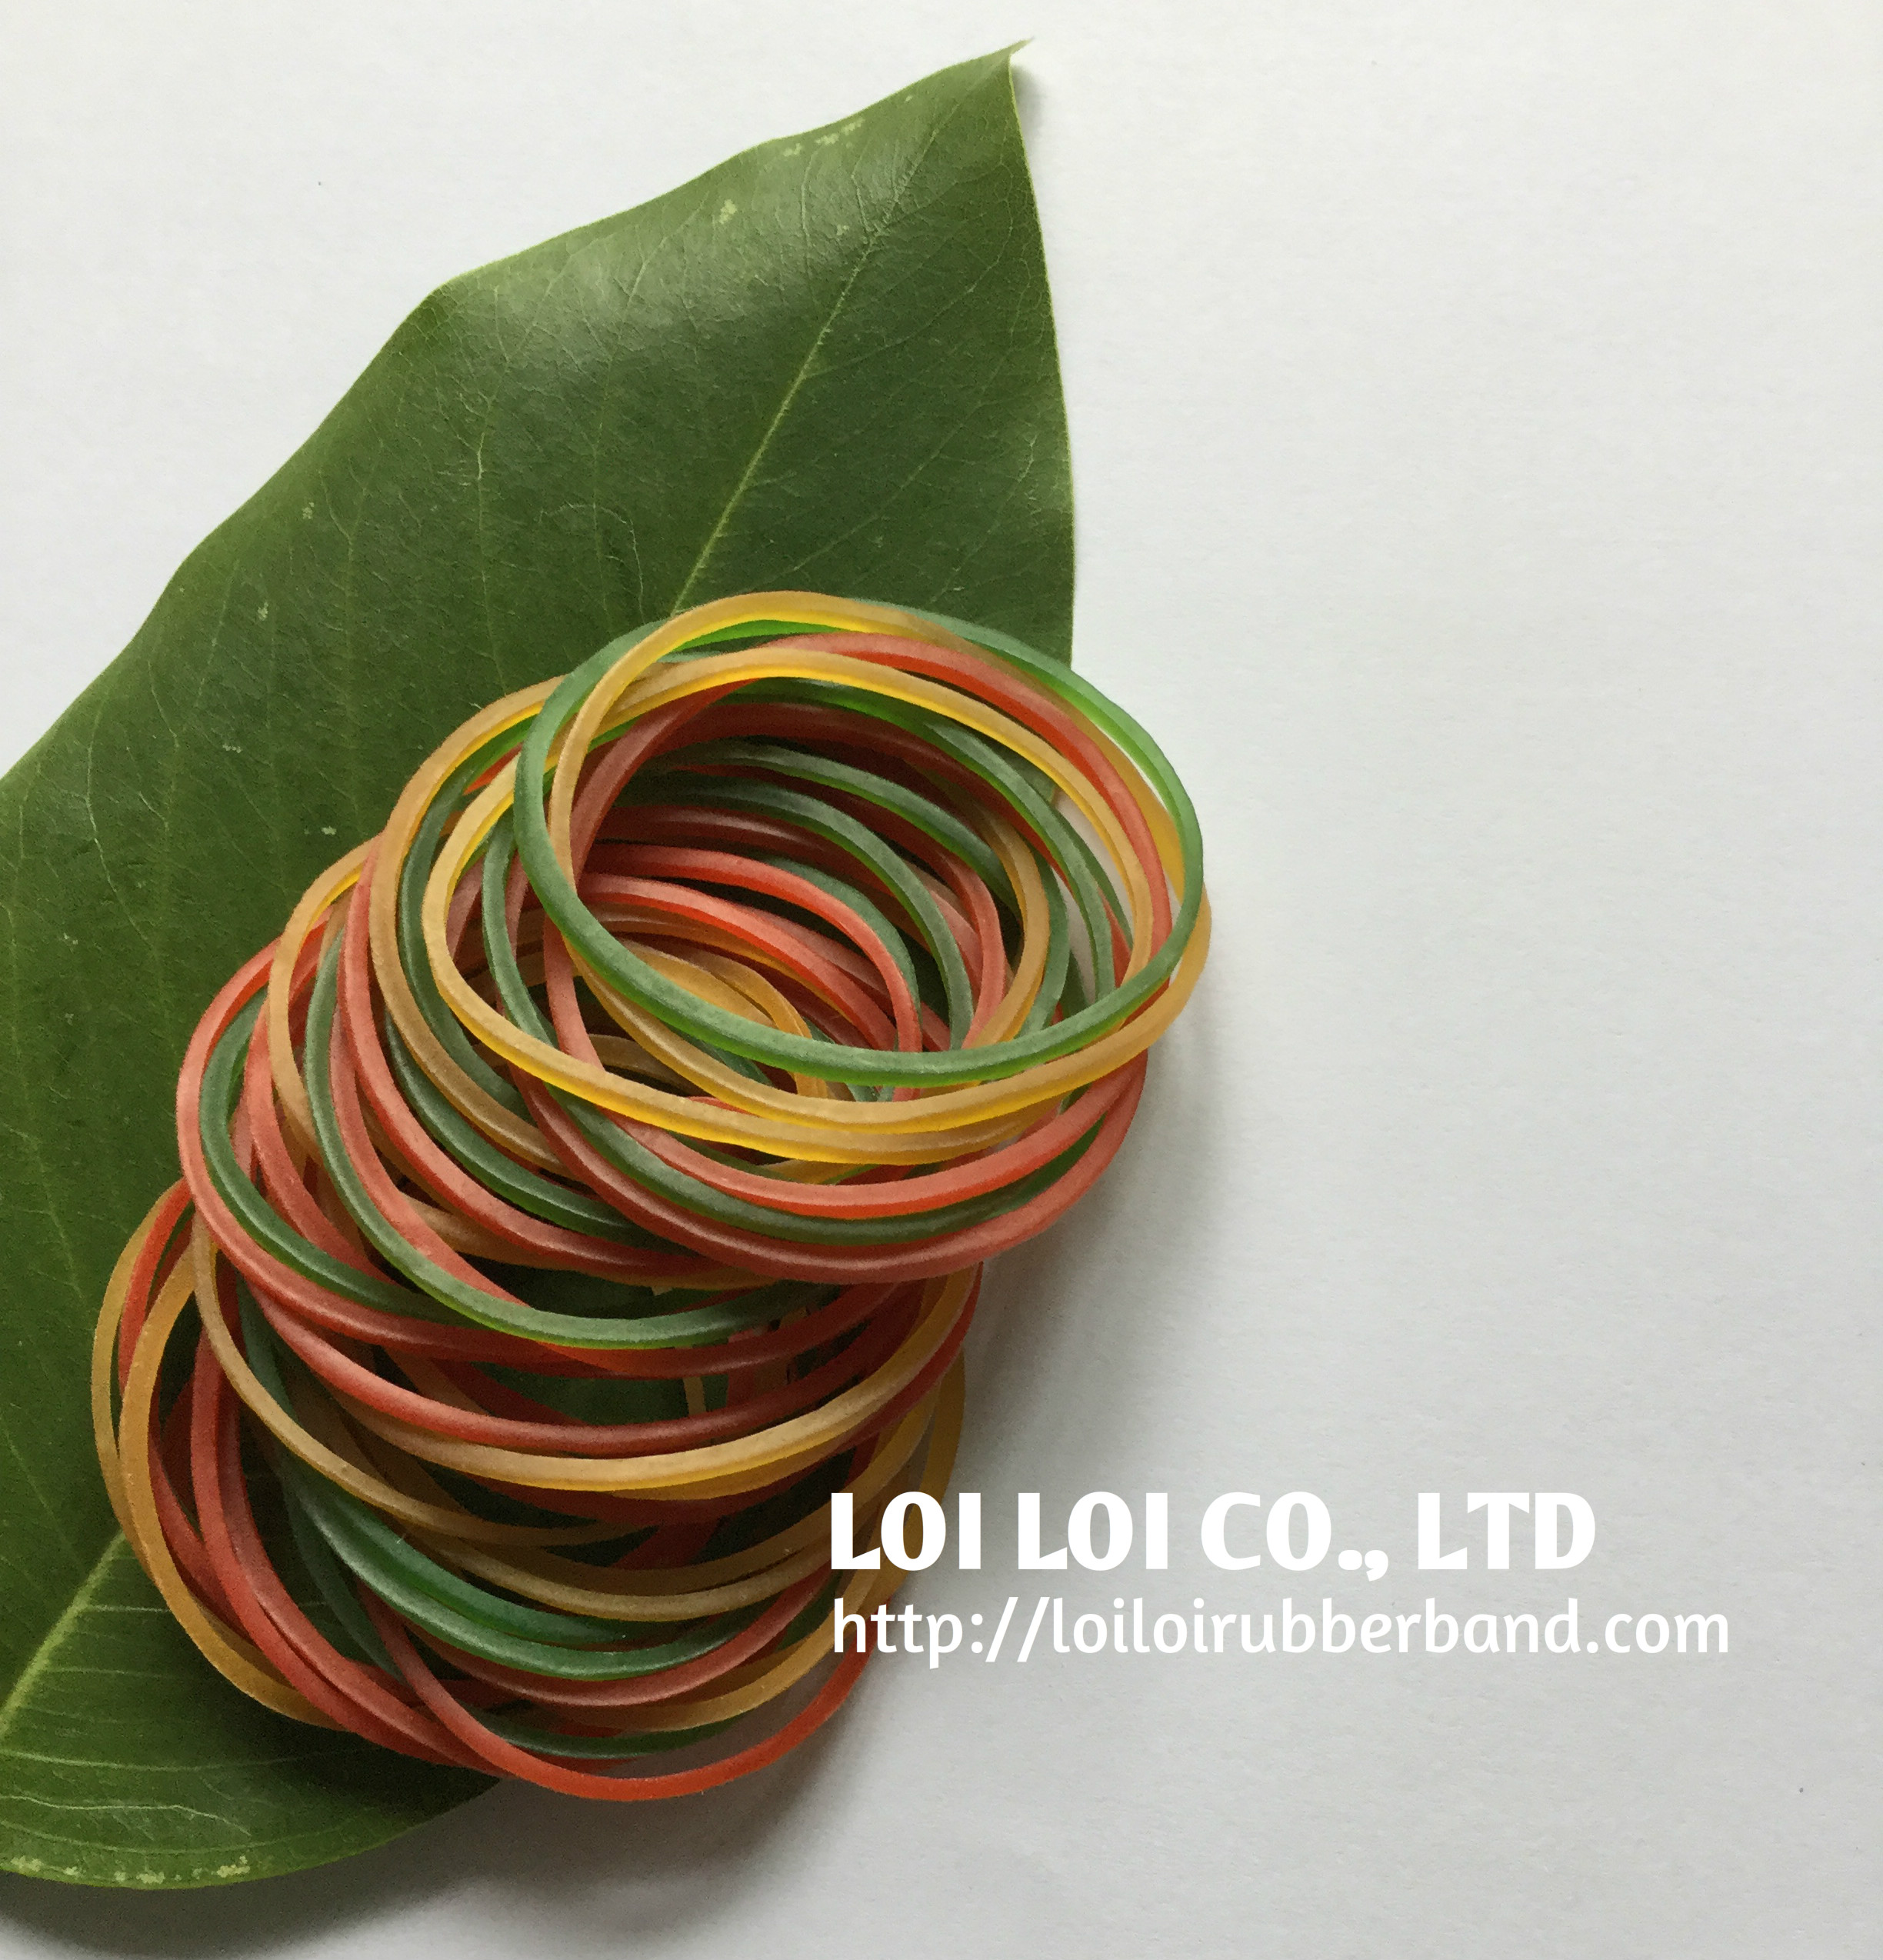 Natural color Rubber band use in Office stationery with the most interest tone colour Red Green Yellow to tie money latex free